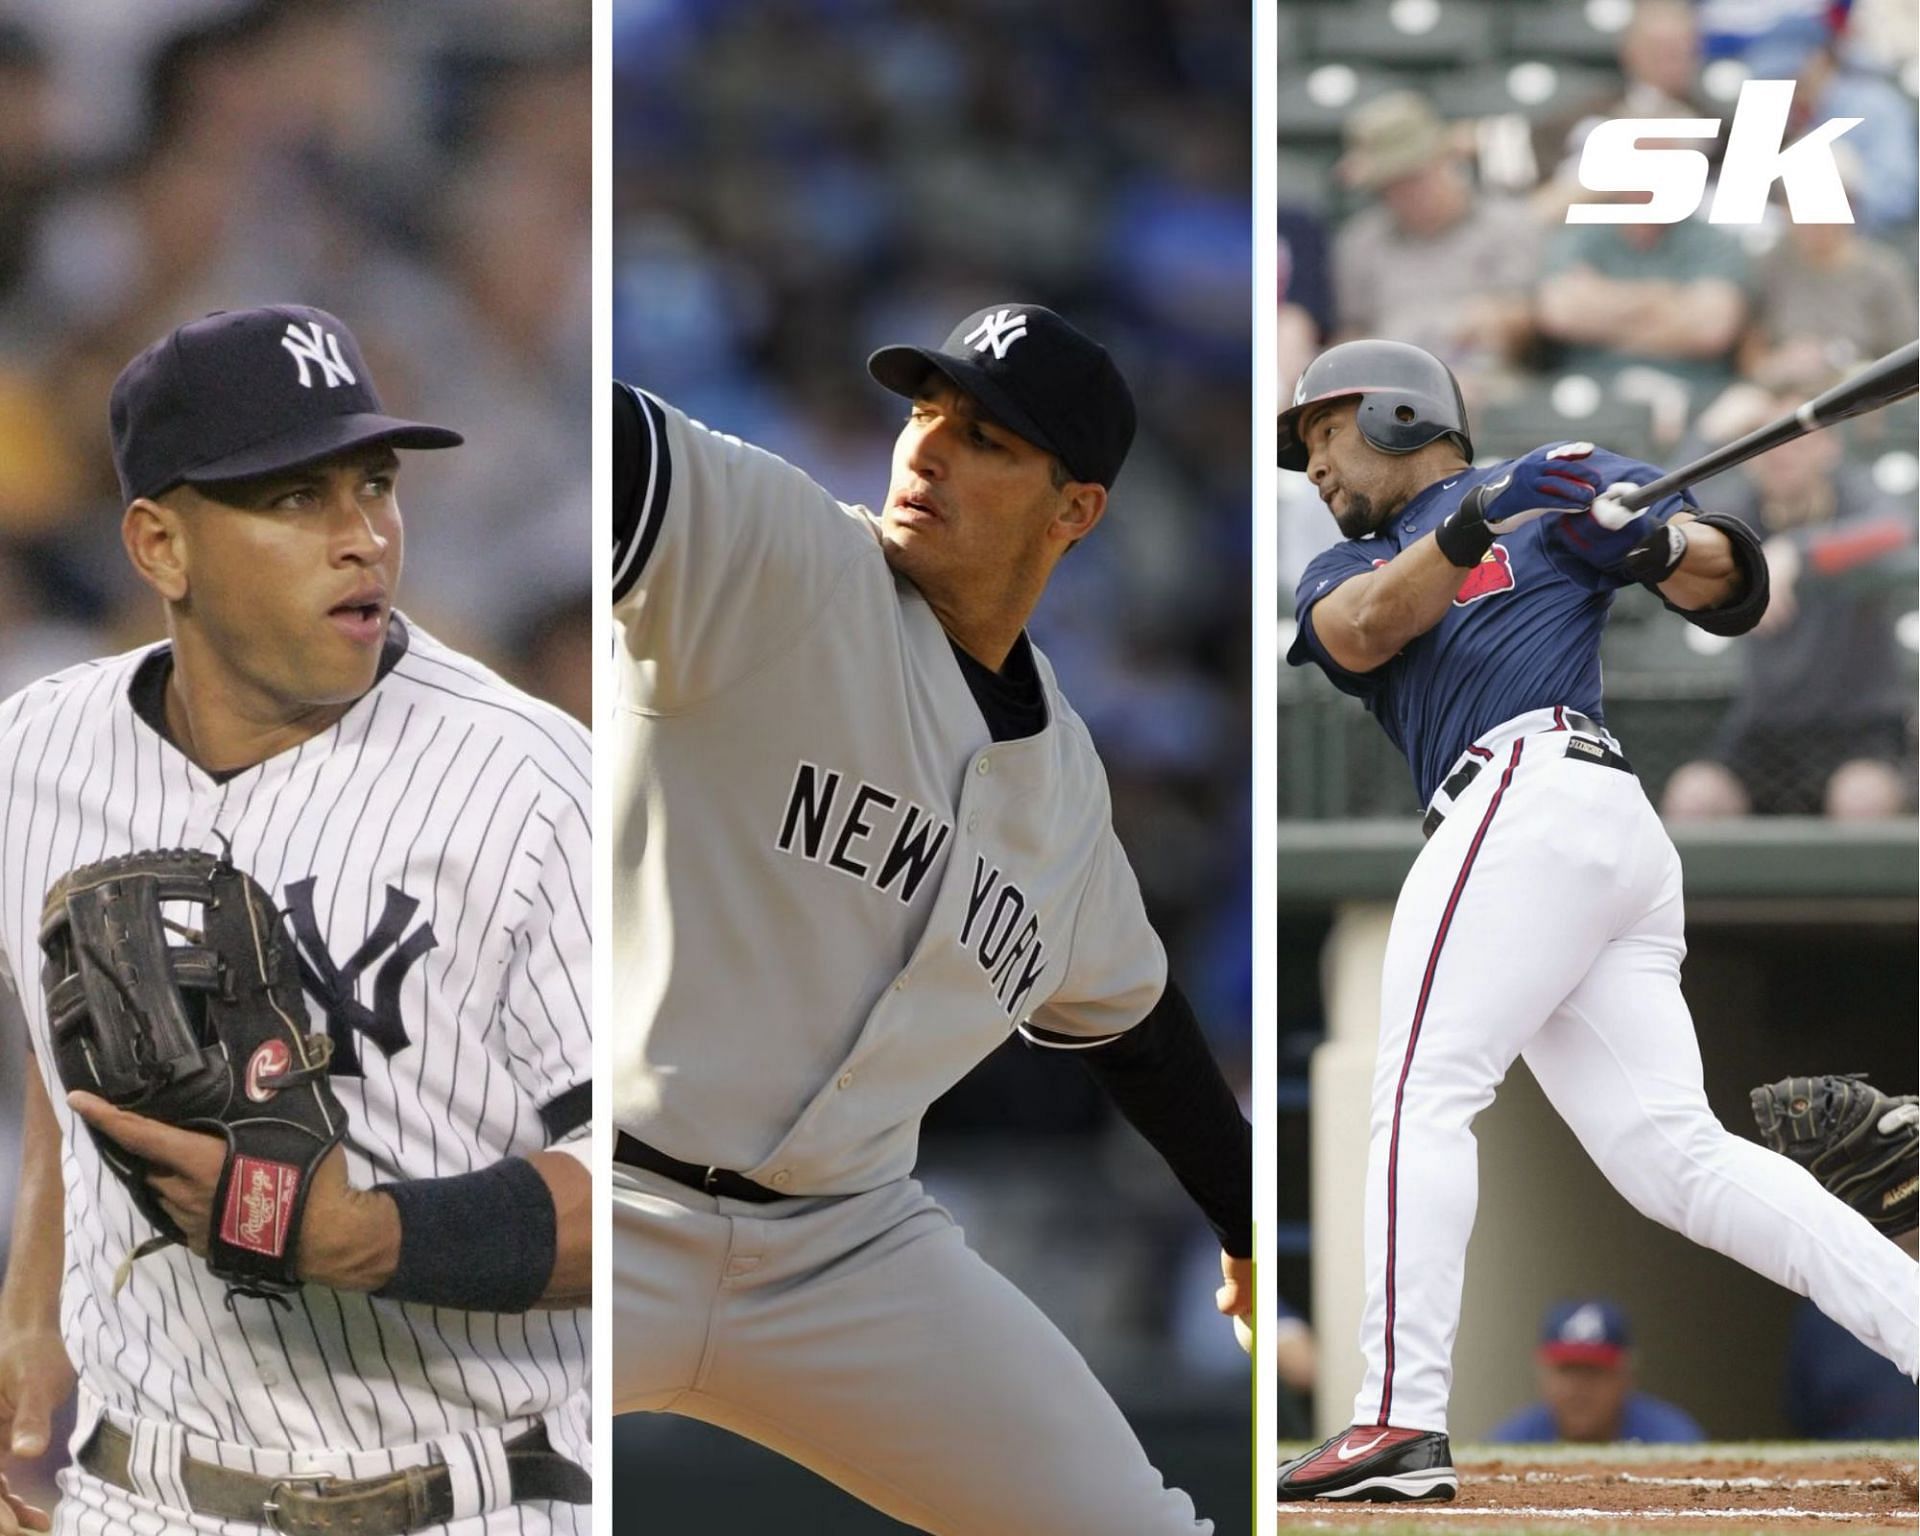 ICYMI: Controversial New York Yankees players Alex Rodriguez, Andy Pettitte  and Gary Sheffield all feature on the 2023 Hall of Fame ballot despite  their history of PED use